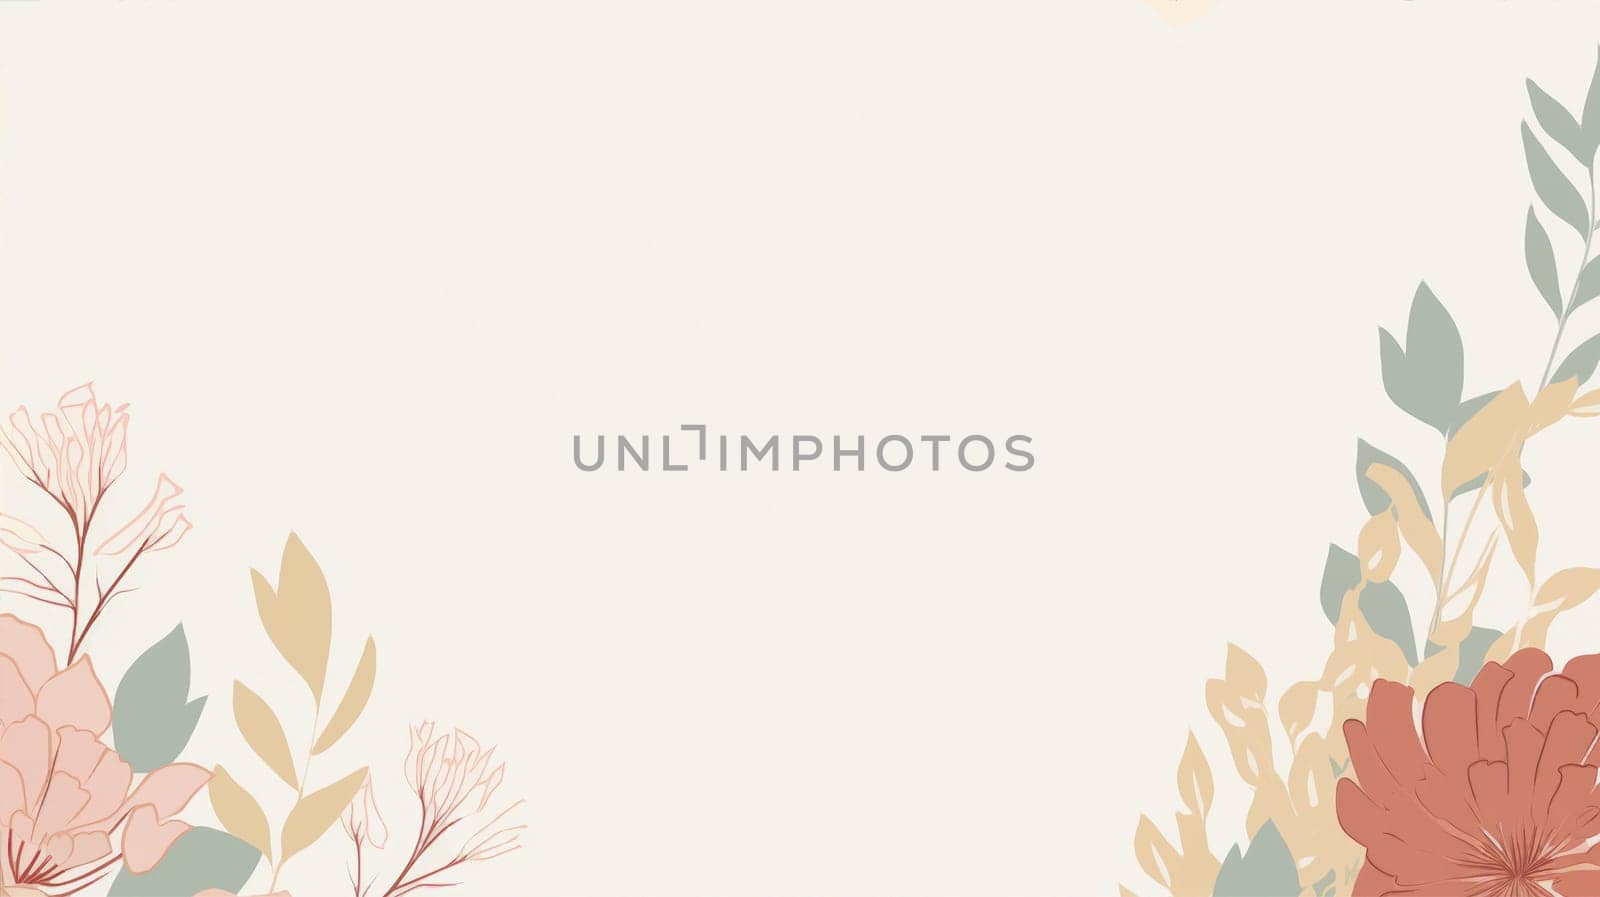 A minimalist illustration with a large empty space in the middle and a thin floral border in various colors on a plain background. Watercolor floral illustration by igor010